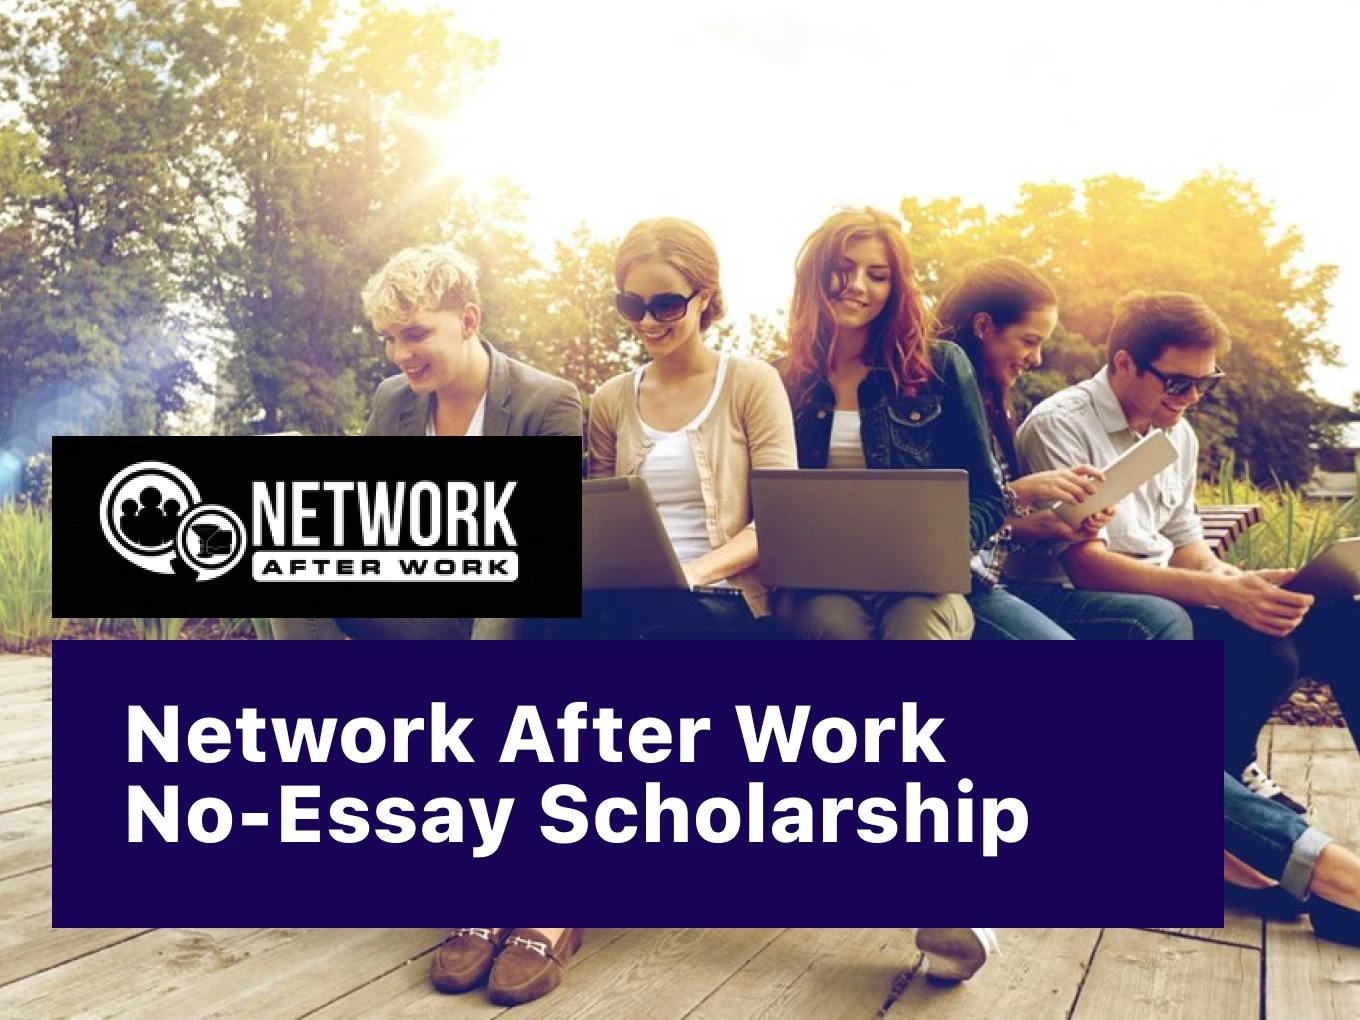 Network After Work No-Essay Grant